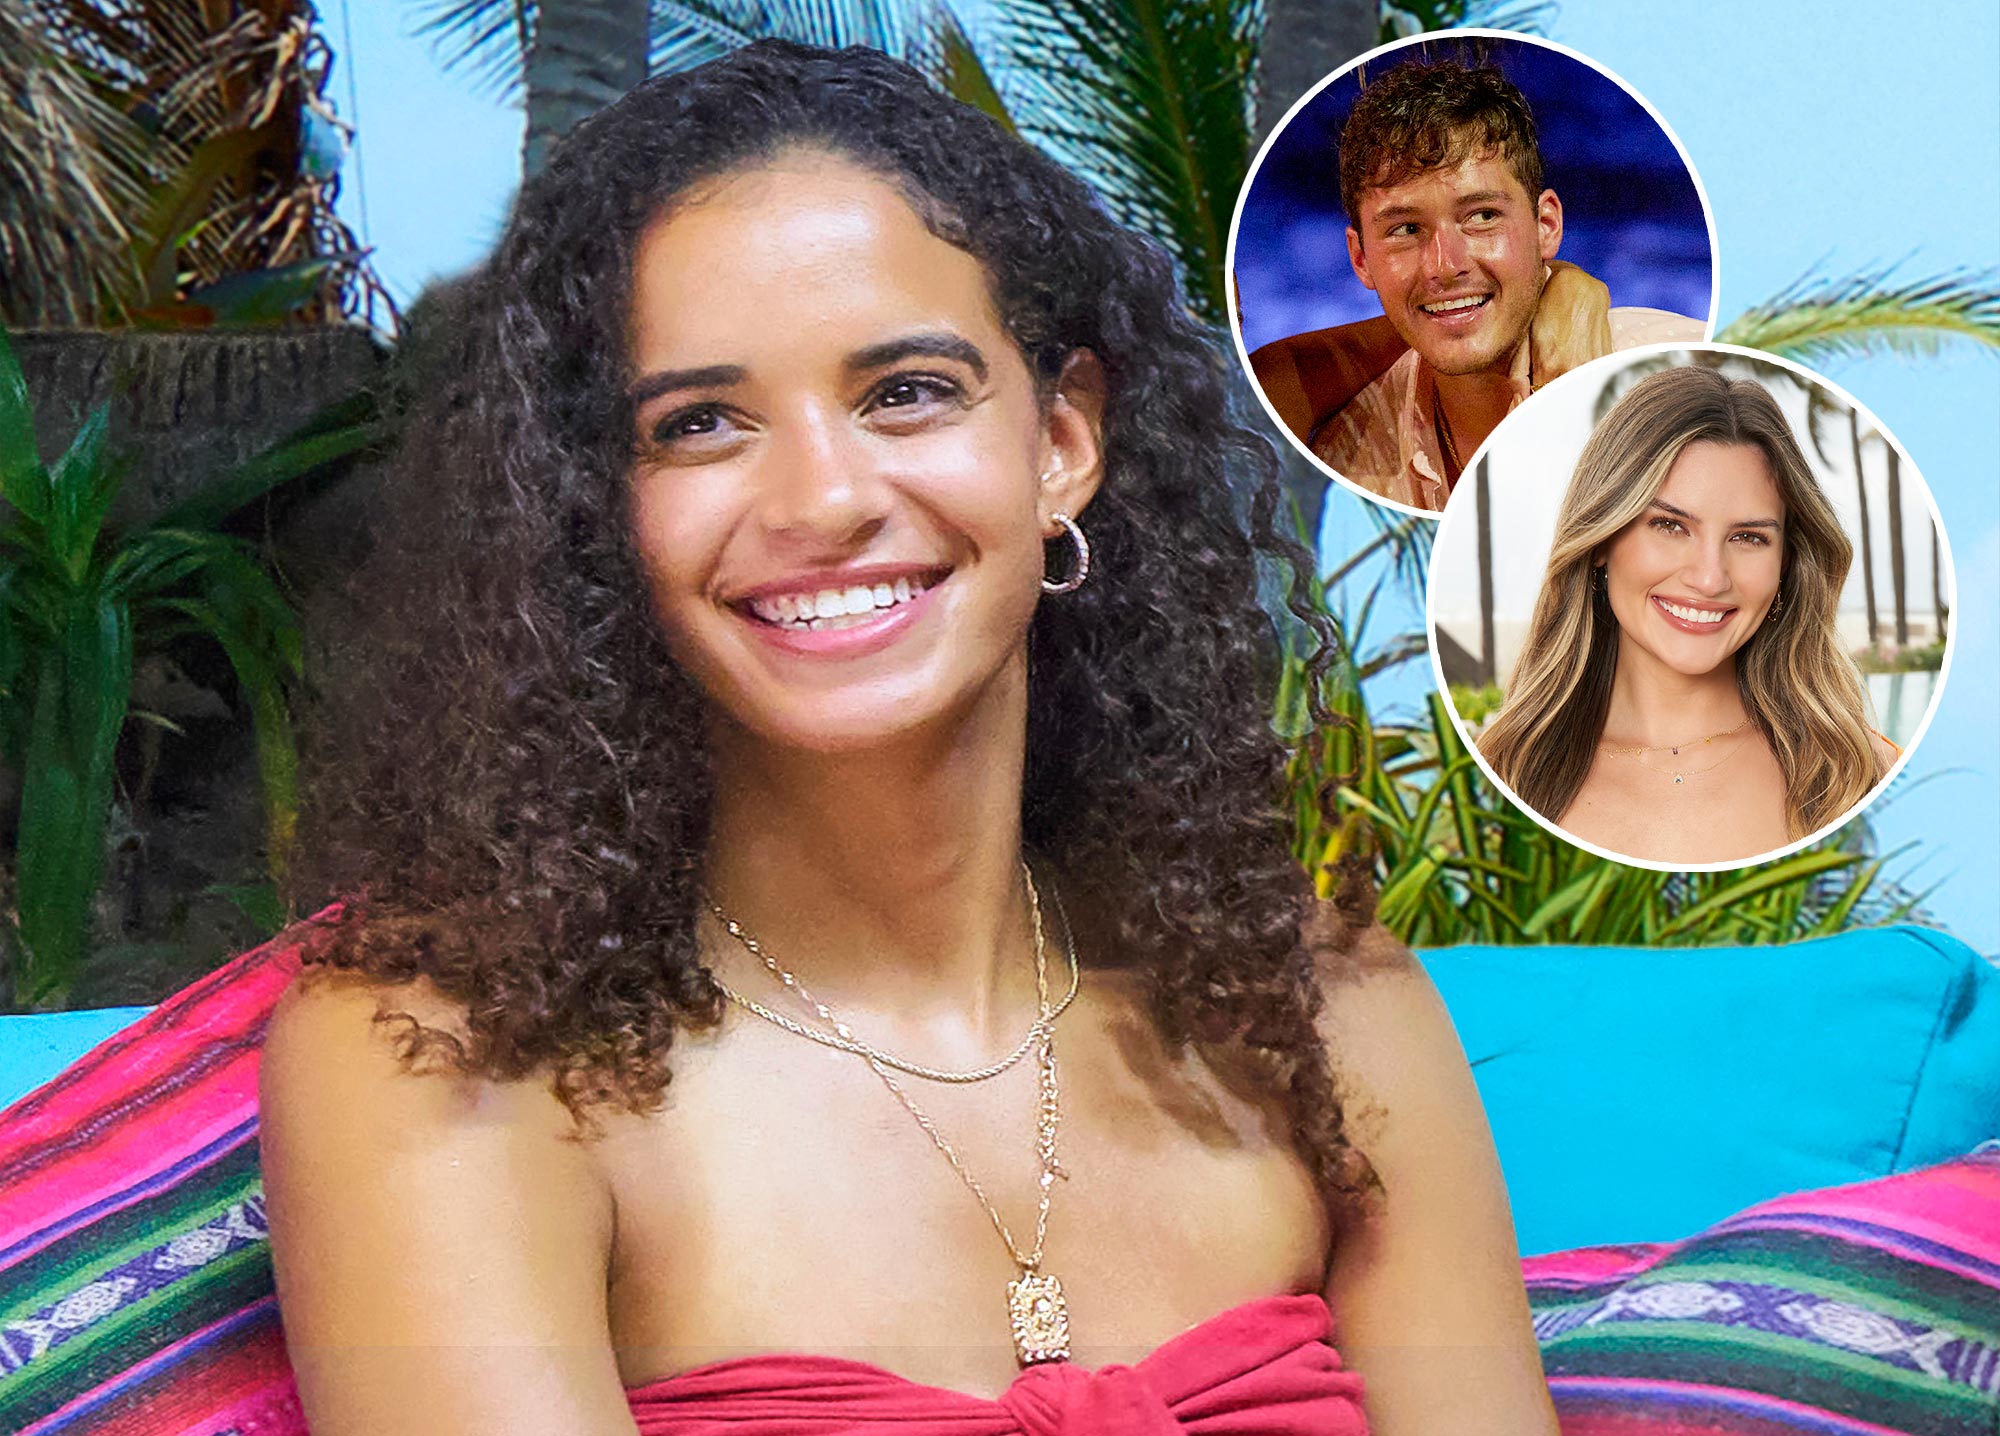 https://www.lifeandstylemag.com/wp-content/uploads/2023/11/Who-Does-Olivia-Lewis-End-up-With-on-Bachelor-in-Paradise-After-Love-Triangle-Finale-Spoilers-122.jpg?quality=86&strip=all